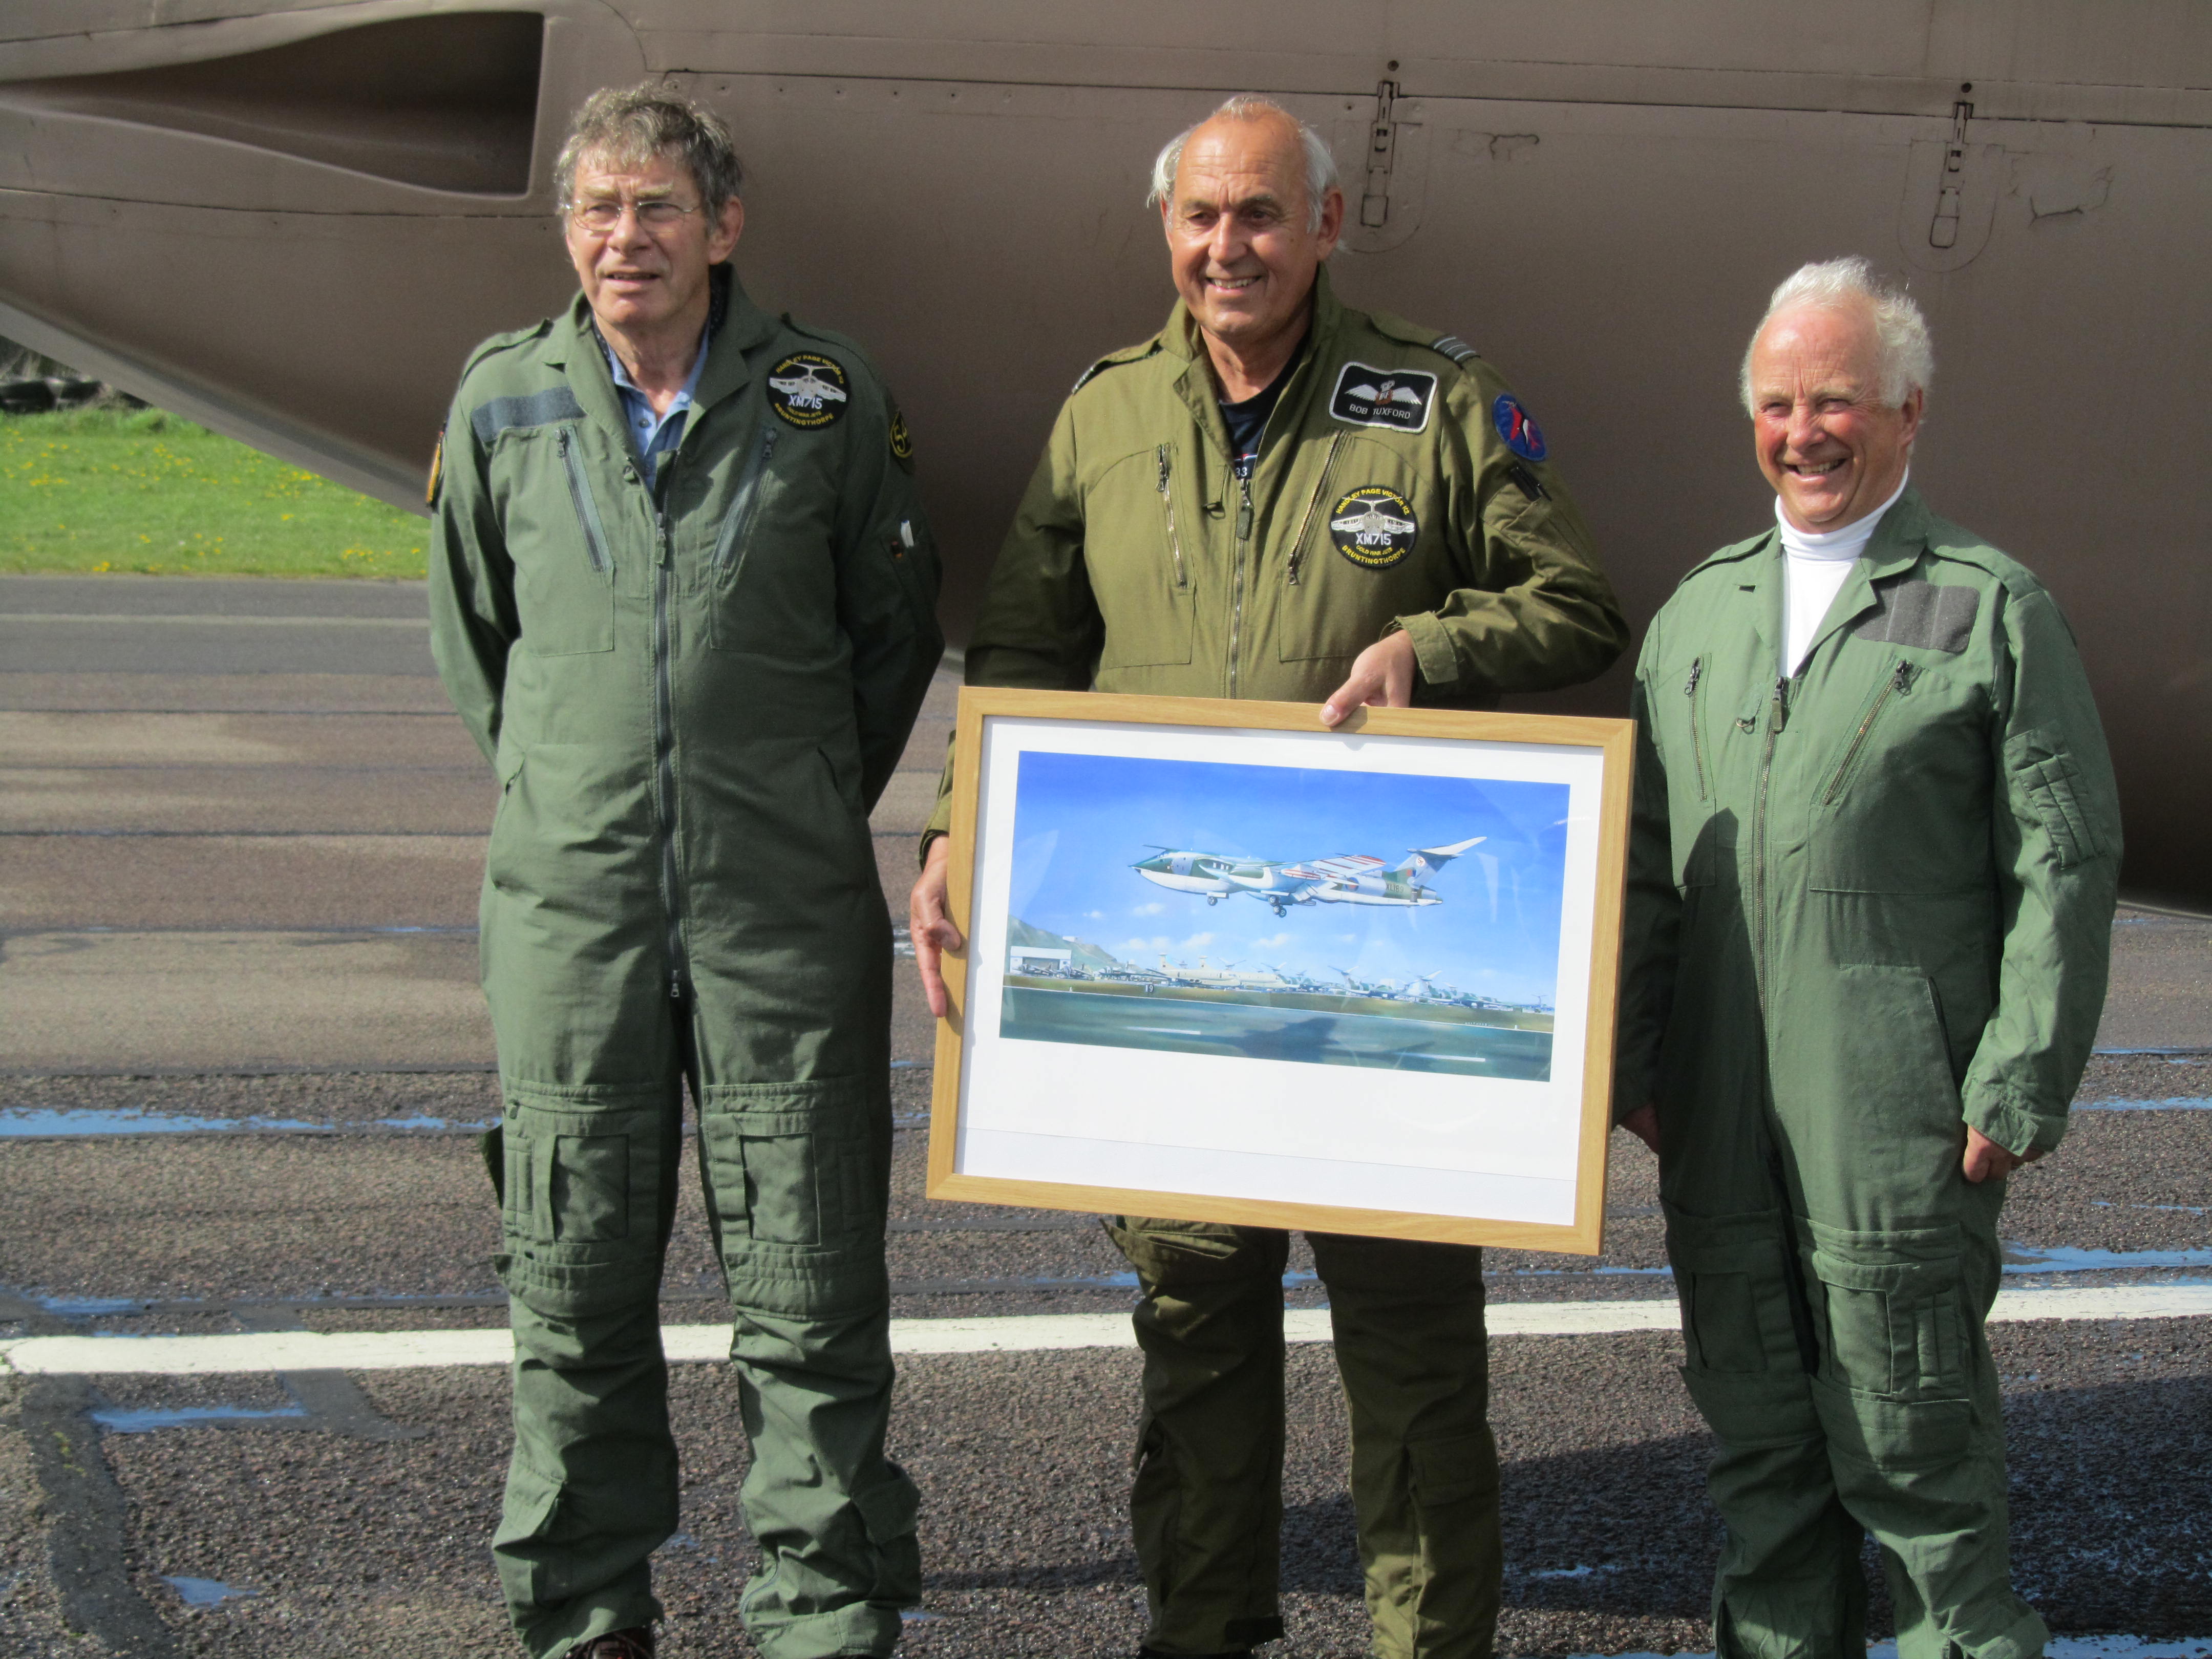 The Aircrew: Mike Beer, Bob Tuxford and Glyn Rees